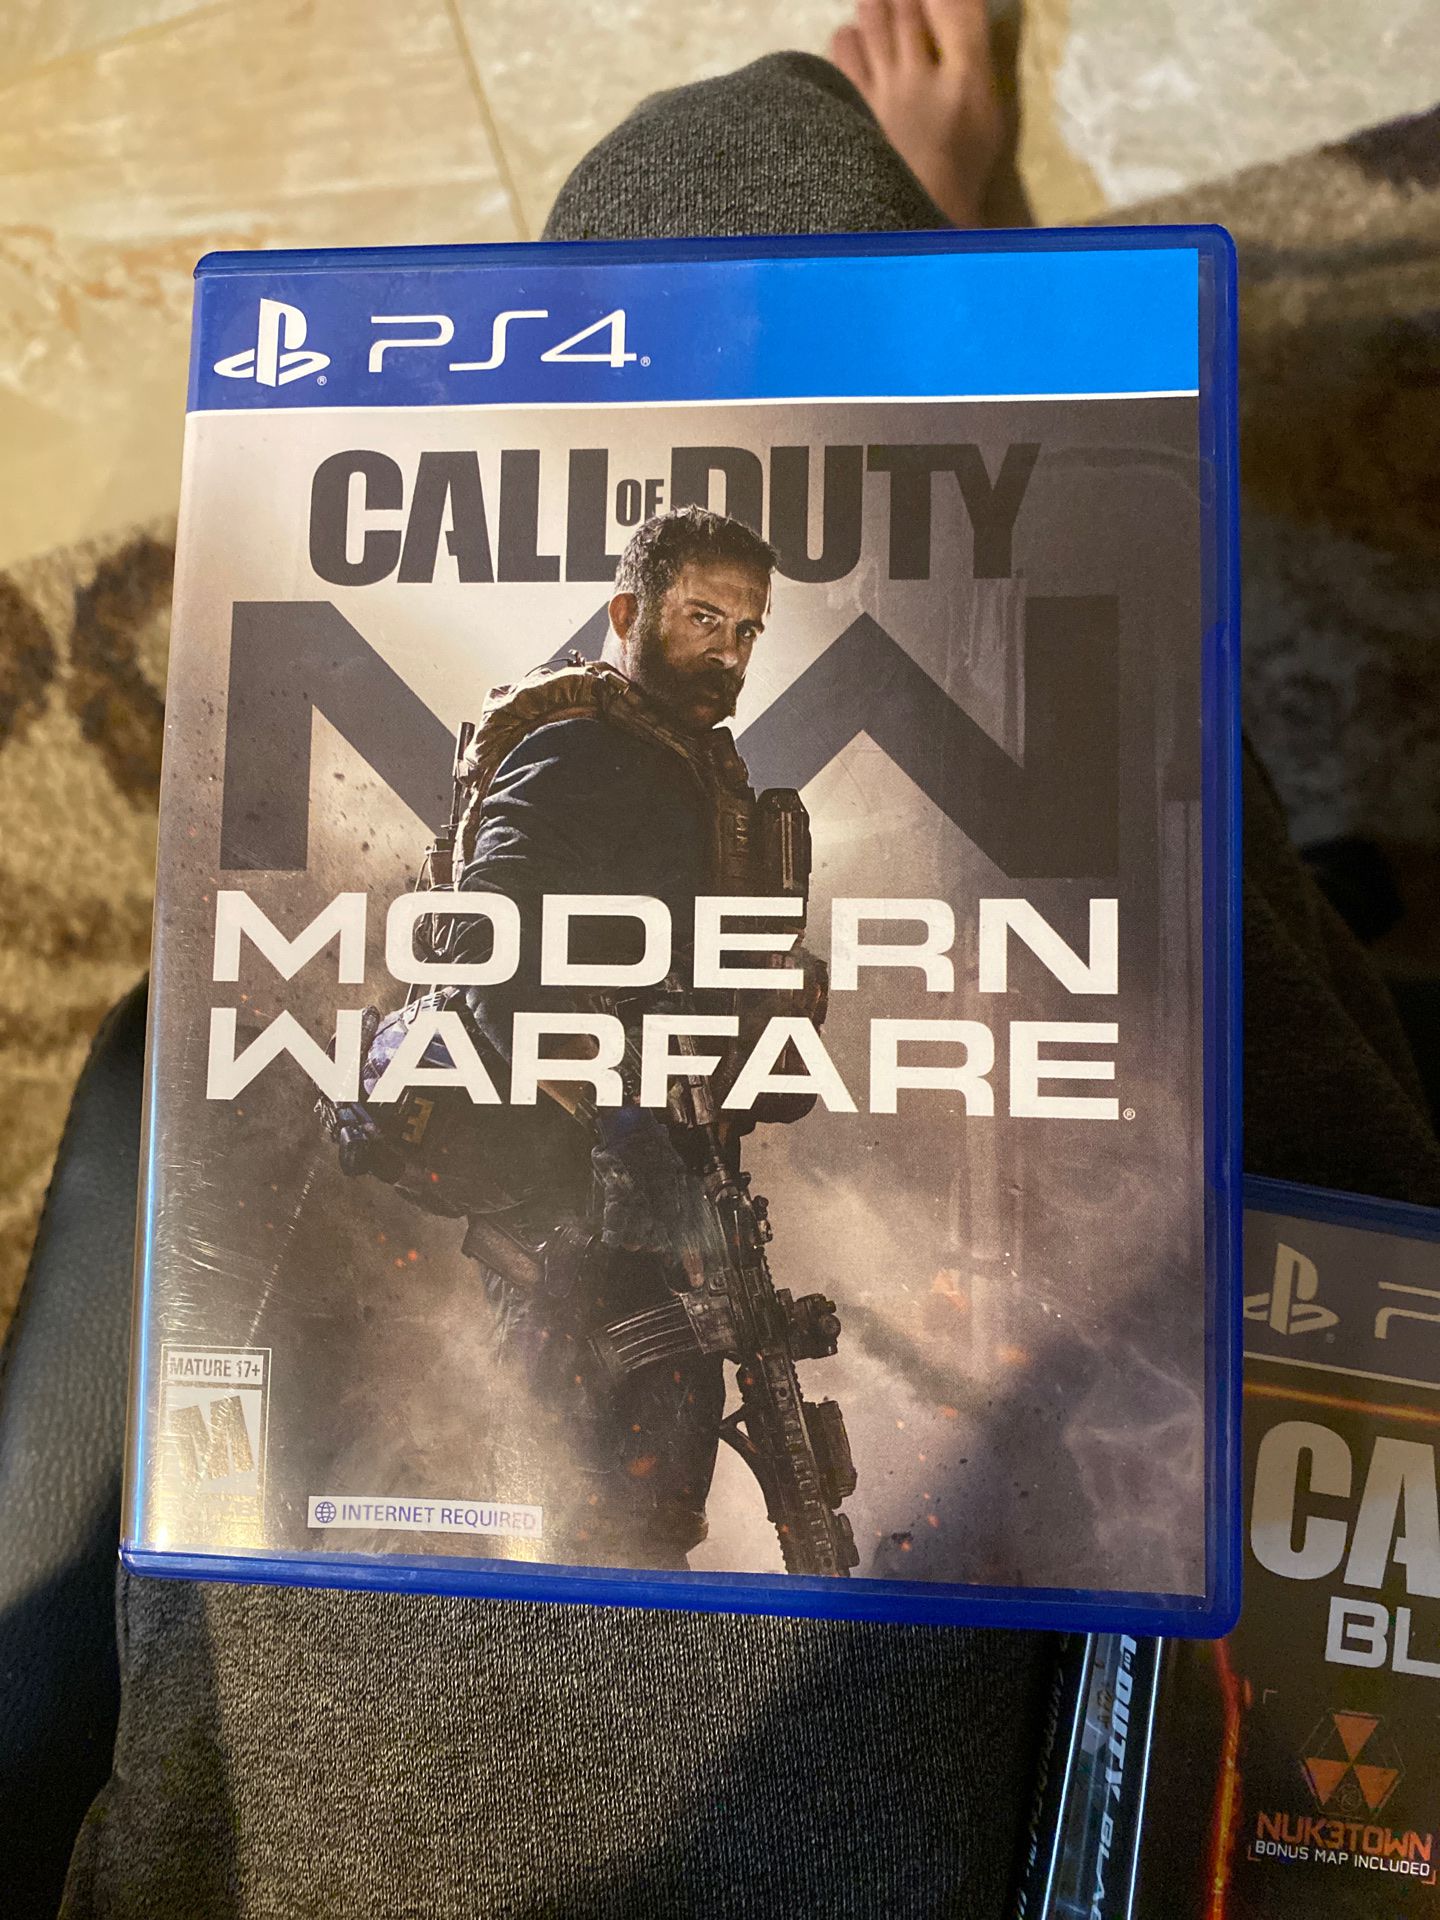 Call of duty modern warfare for ps4 brand new